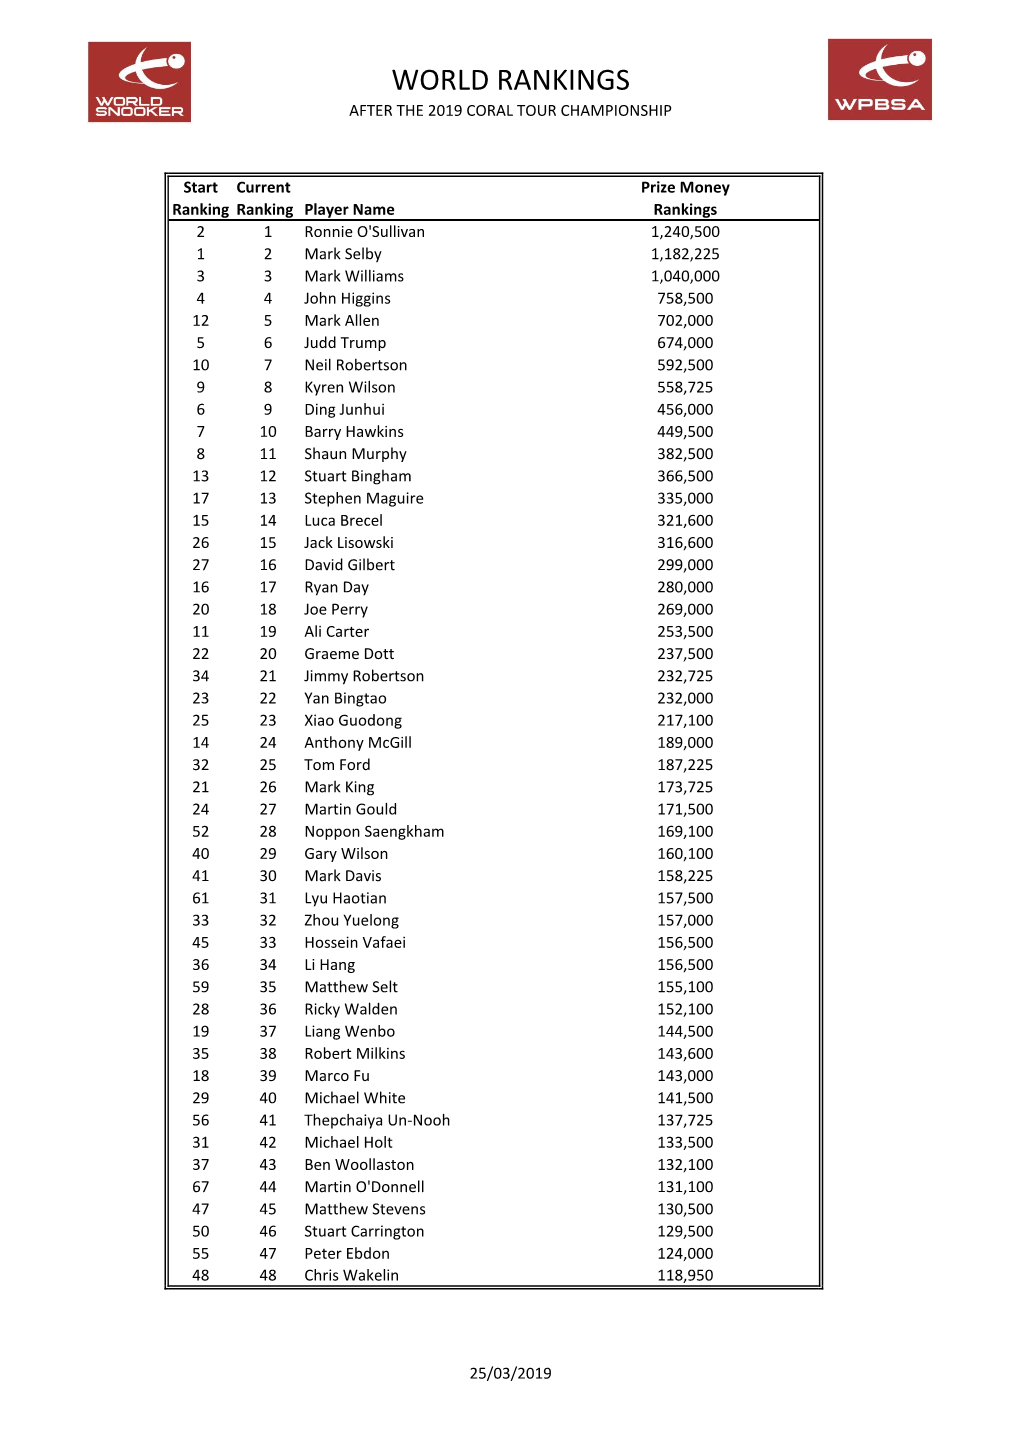 World Ranking List After 2019 Tour Champs